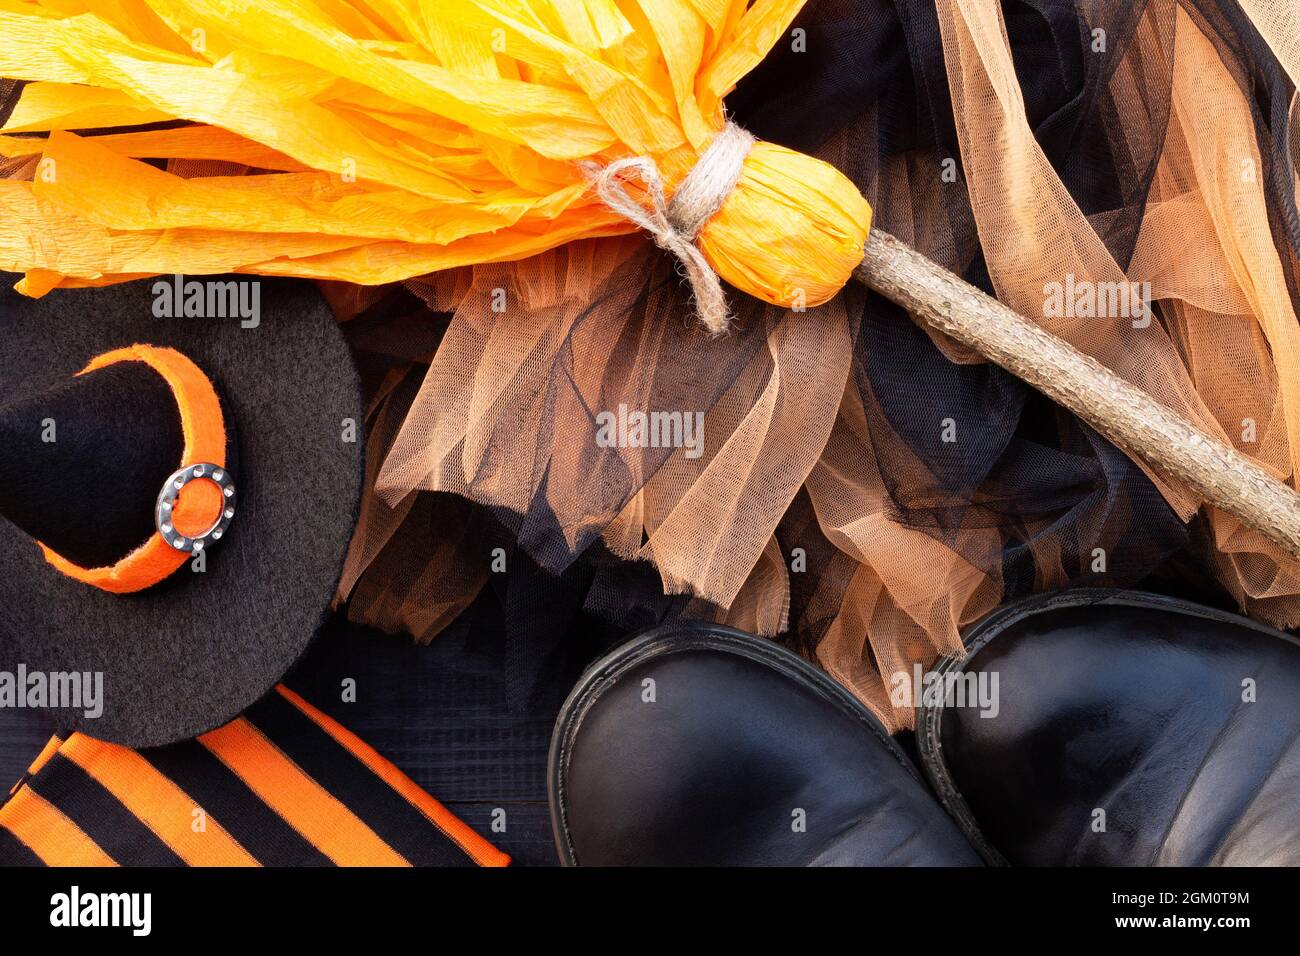 Orange and black Halloween flatlay. Witch clothes: stockings, boots, hat, broom, skirt on black background Stock Photo